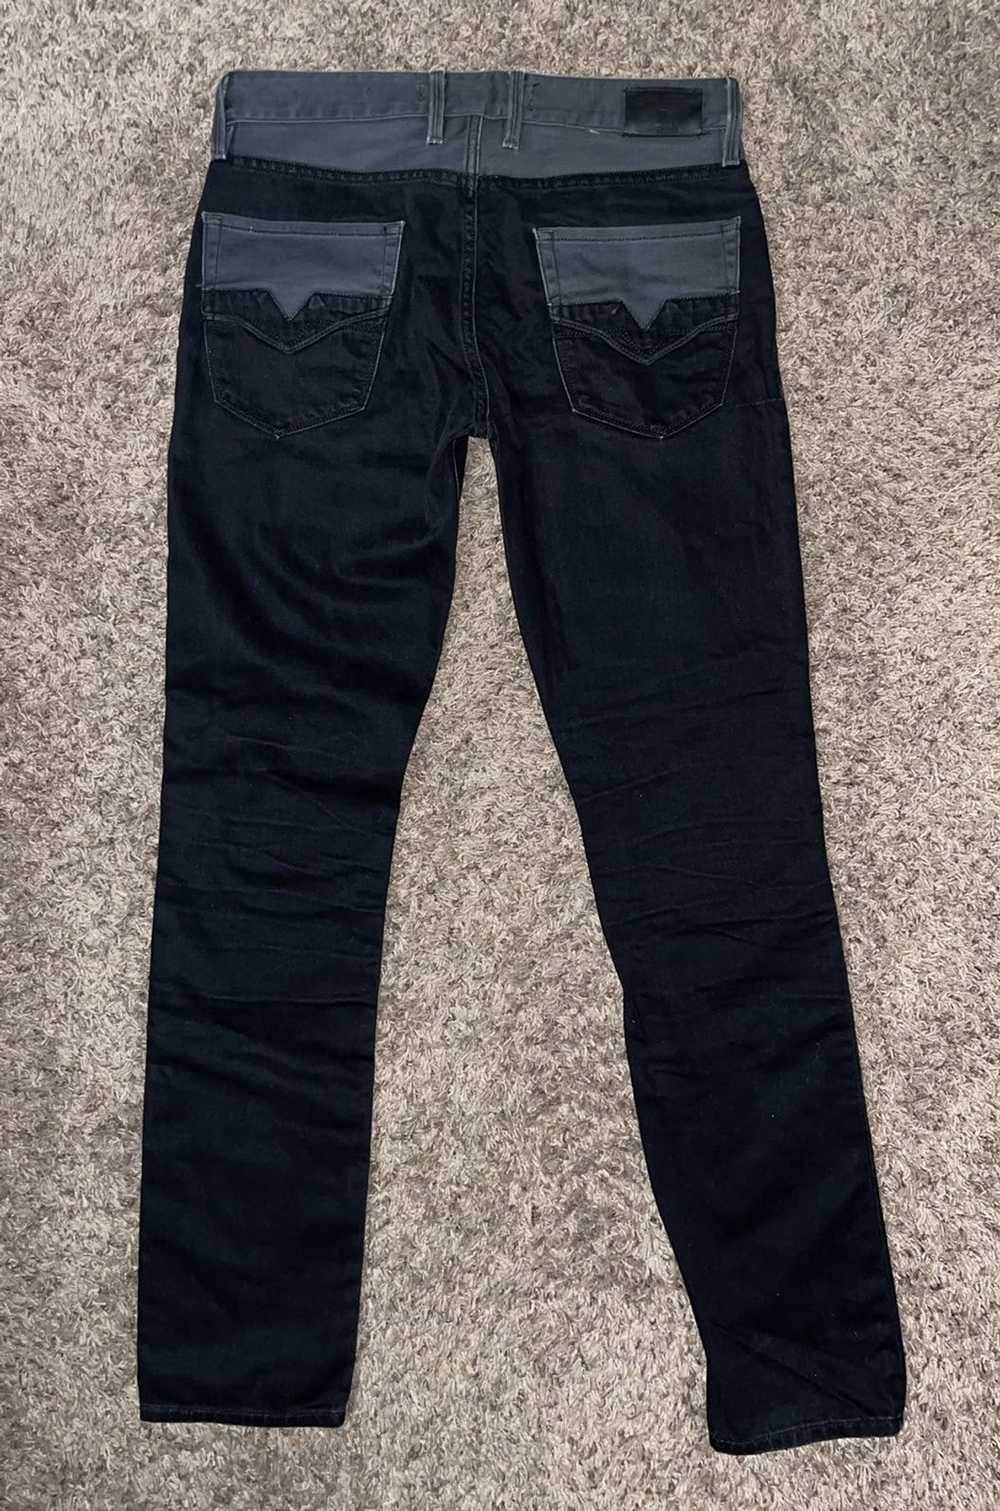 Guess Guess Slim Tapered Jeans - image 2